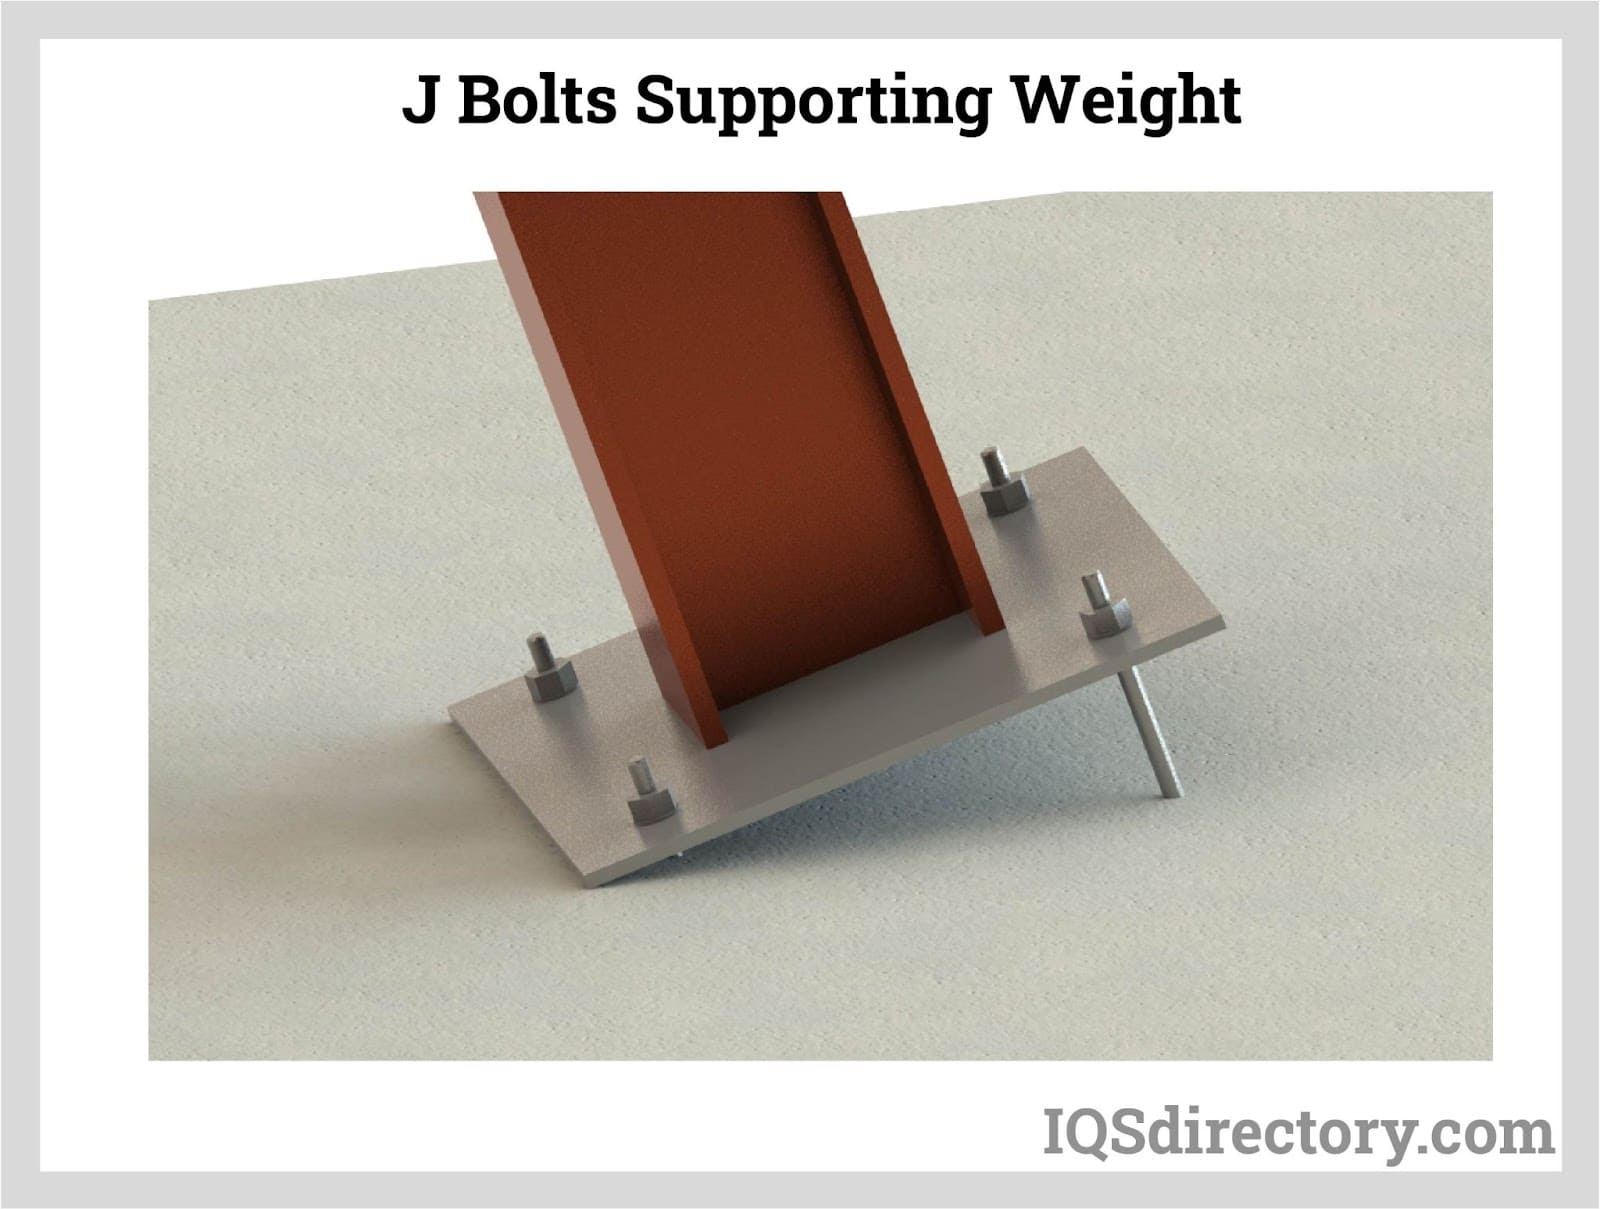 j bolts supporting weight